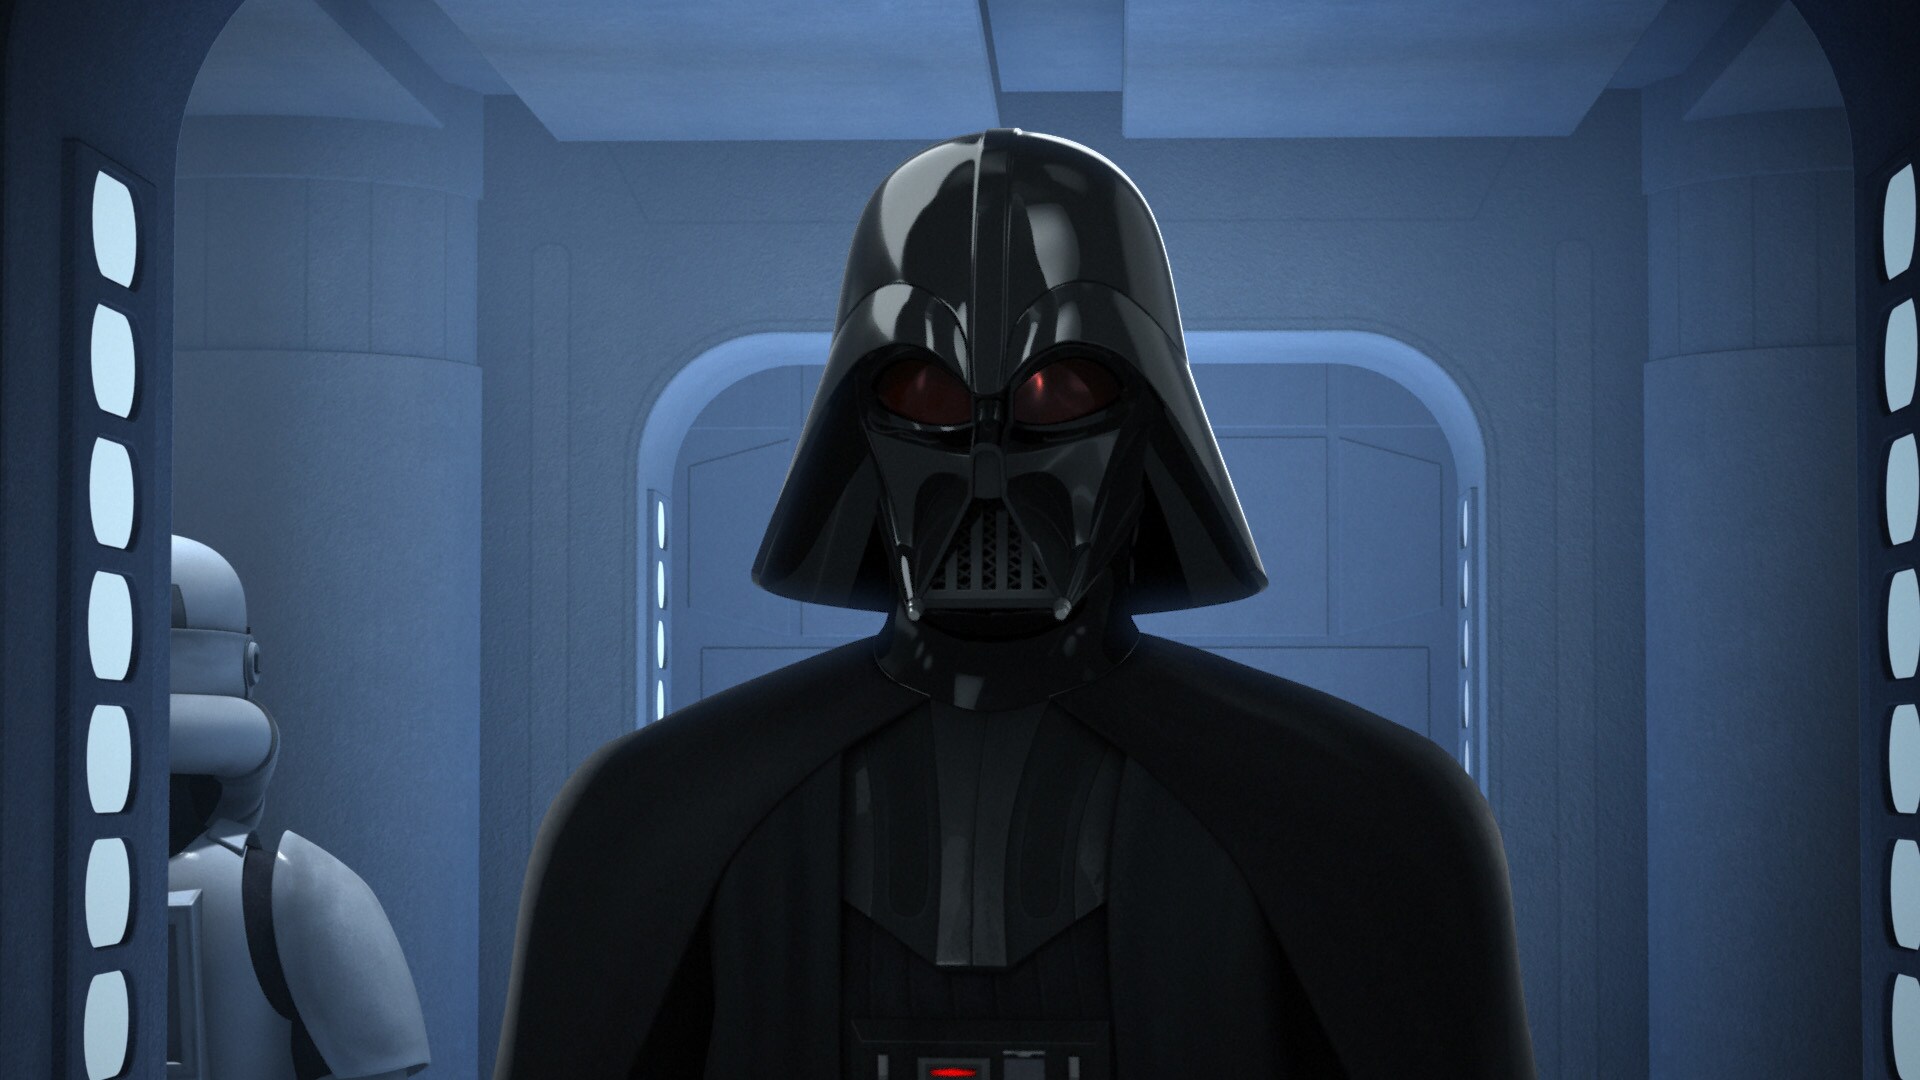 It is the voice of Darth Vader, Sith Lord. He has been sent to Lothal to deal with the rebels him...